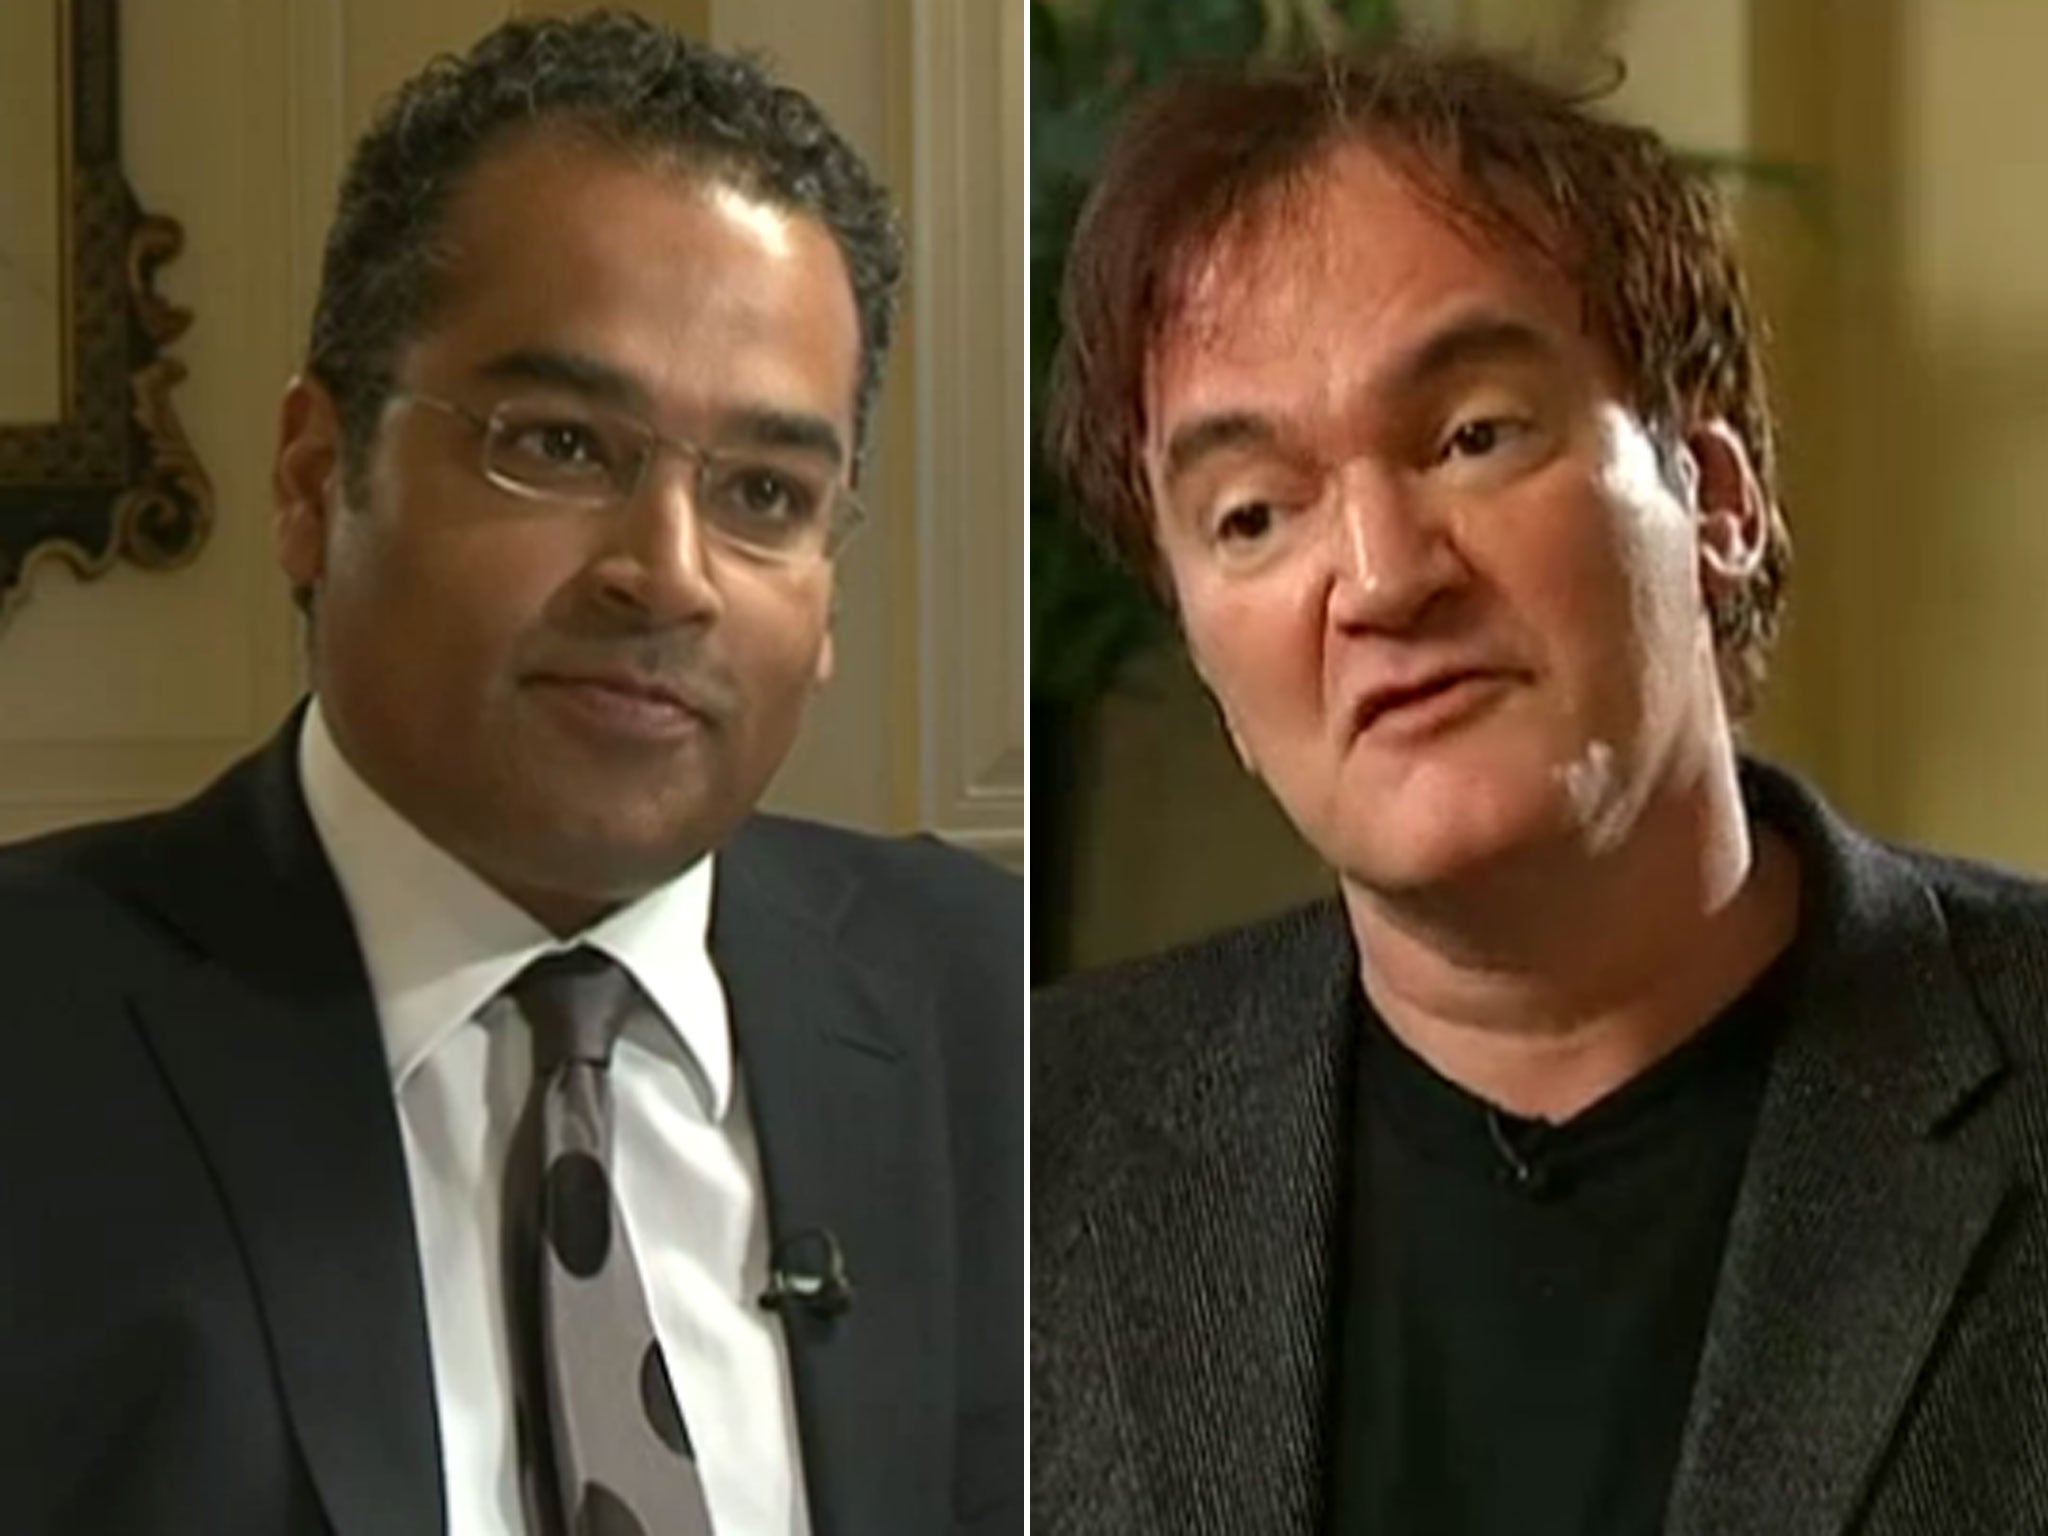 Quentin Tarantino refuses to discuss any link between movie violence and real life violence during a heated interview with Krishnan Guru-Murthy about his latest film Django Unchained